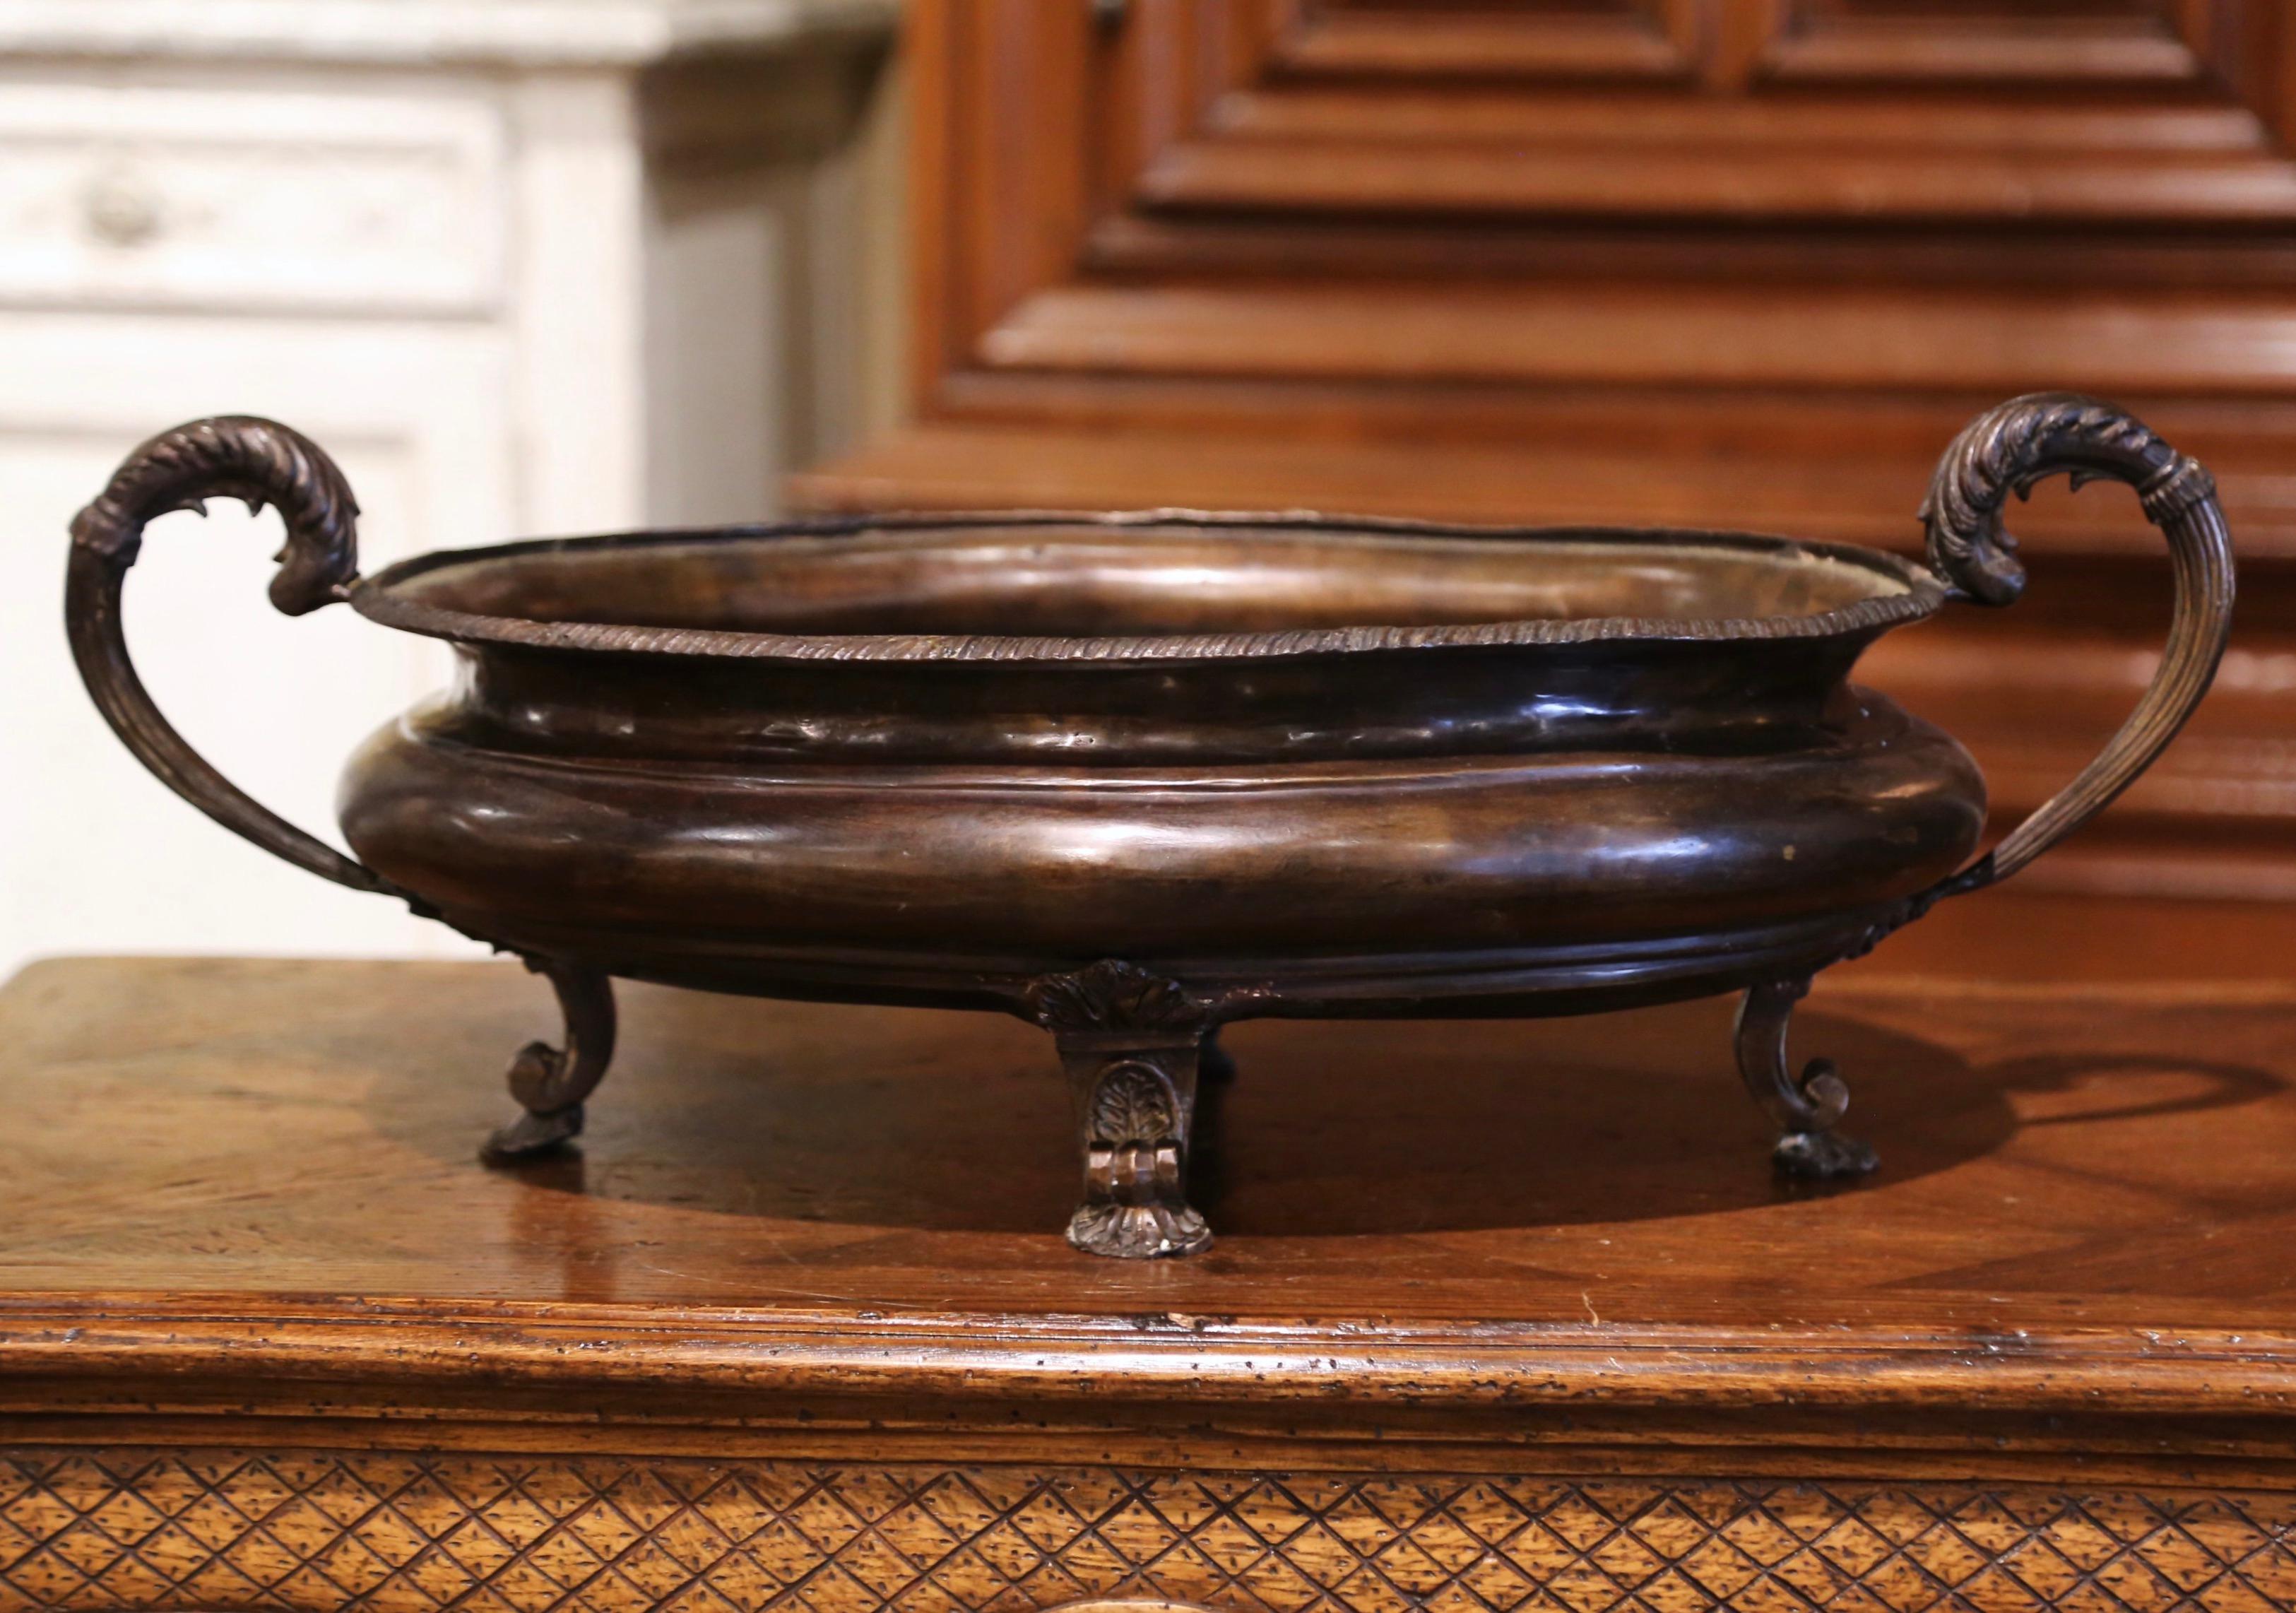 Decorate a dining table with this elegant antique planter. Crafted in France circa 1880, and made of bronze, the jardiniere stands on scrolled feet with foliate motifs. Oval in shape, the floral vase is dressed with leaf handles and features carved